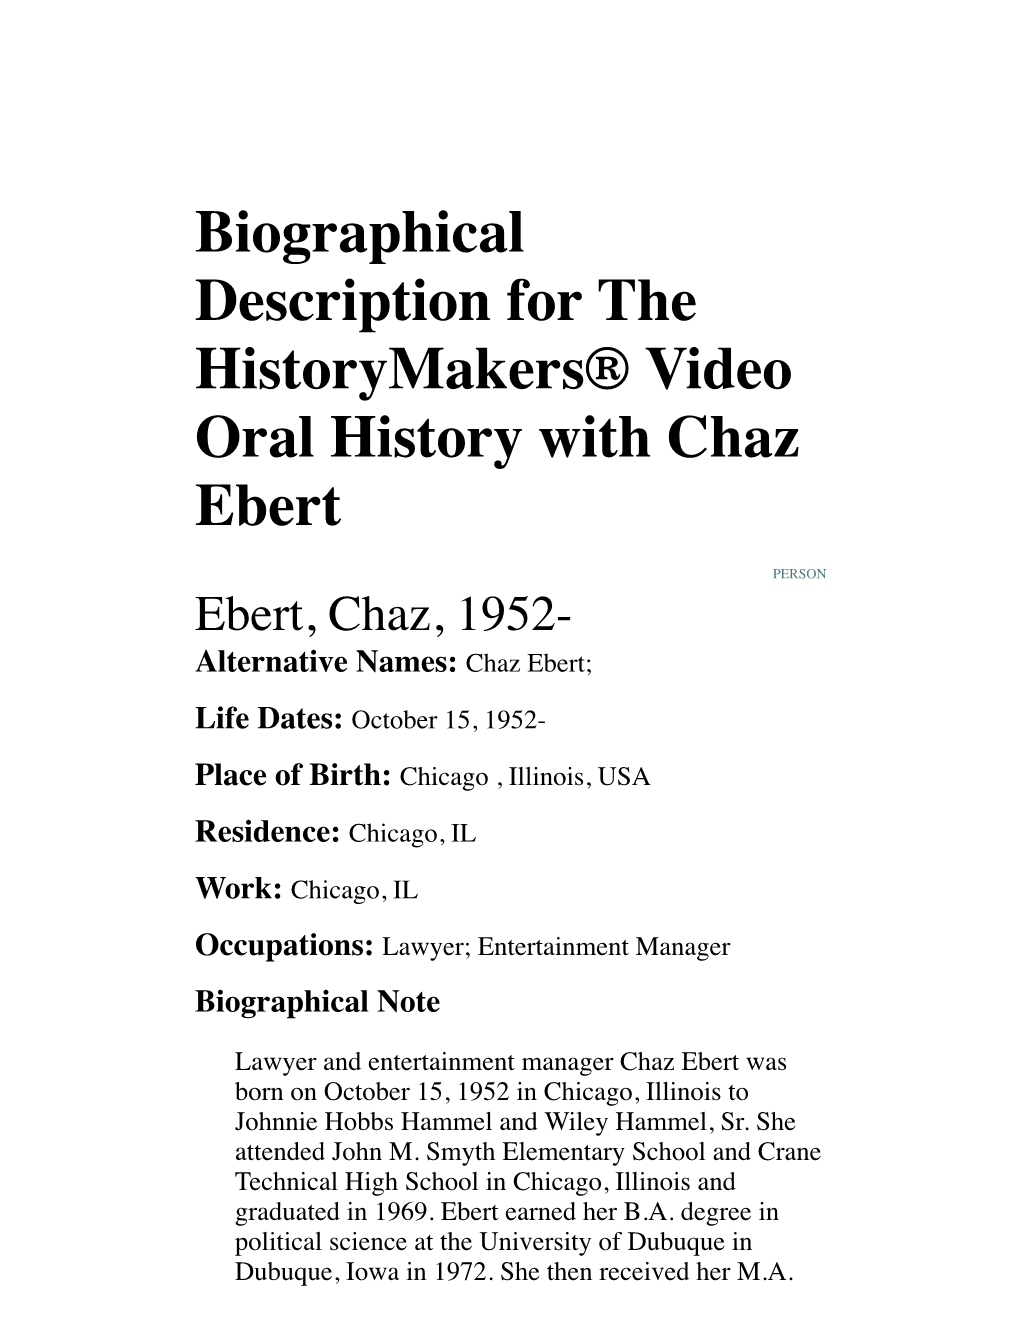 Biographical Description for the Historymakers® Video Oral History with Chaz Ebert